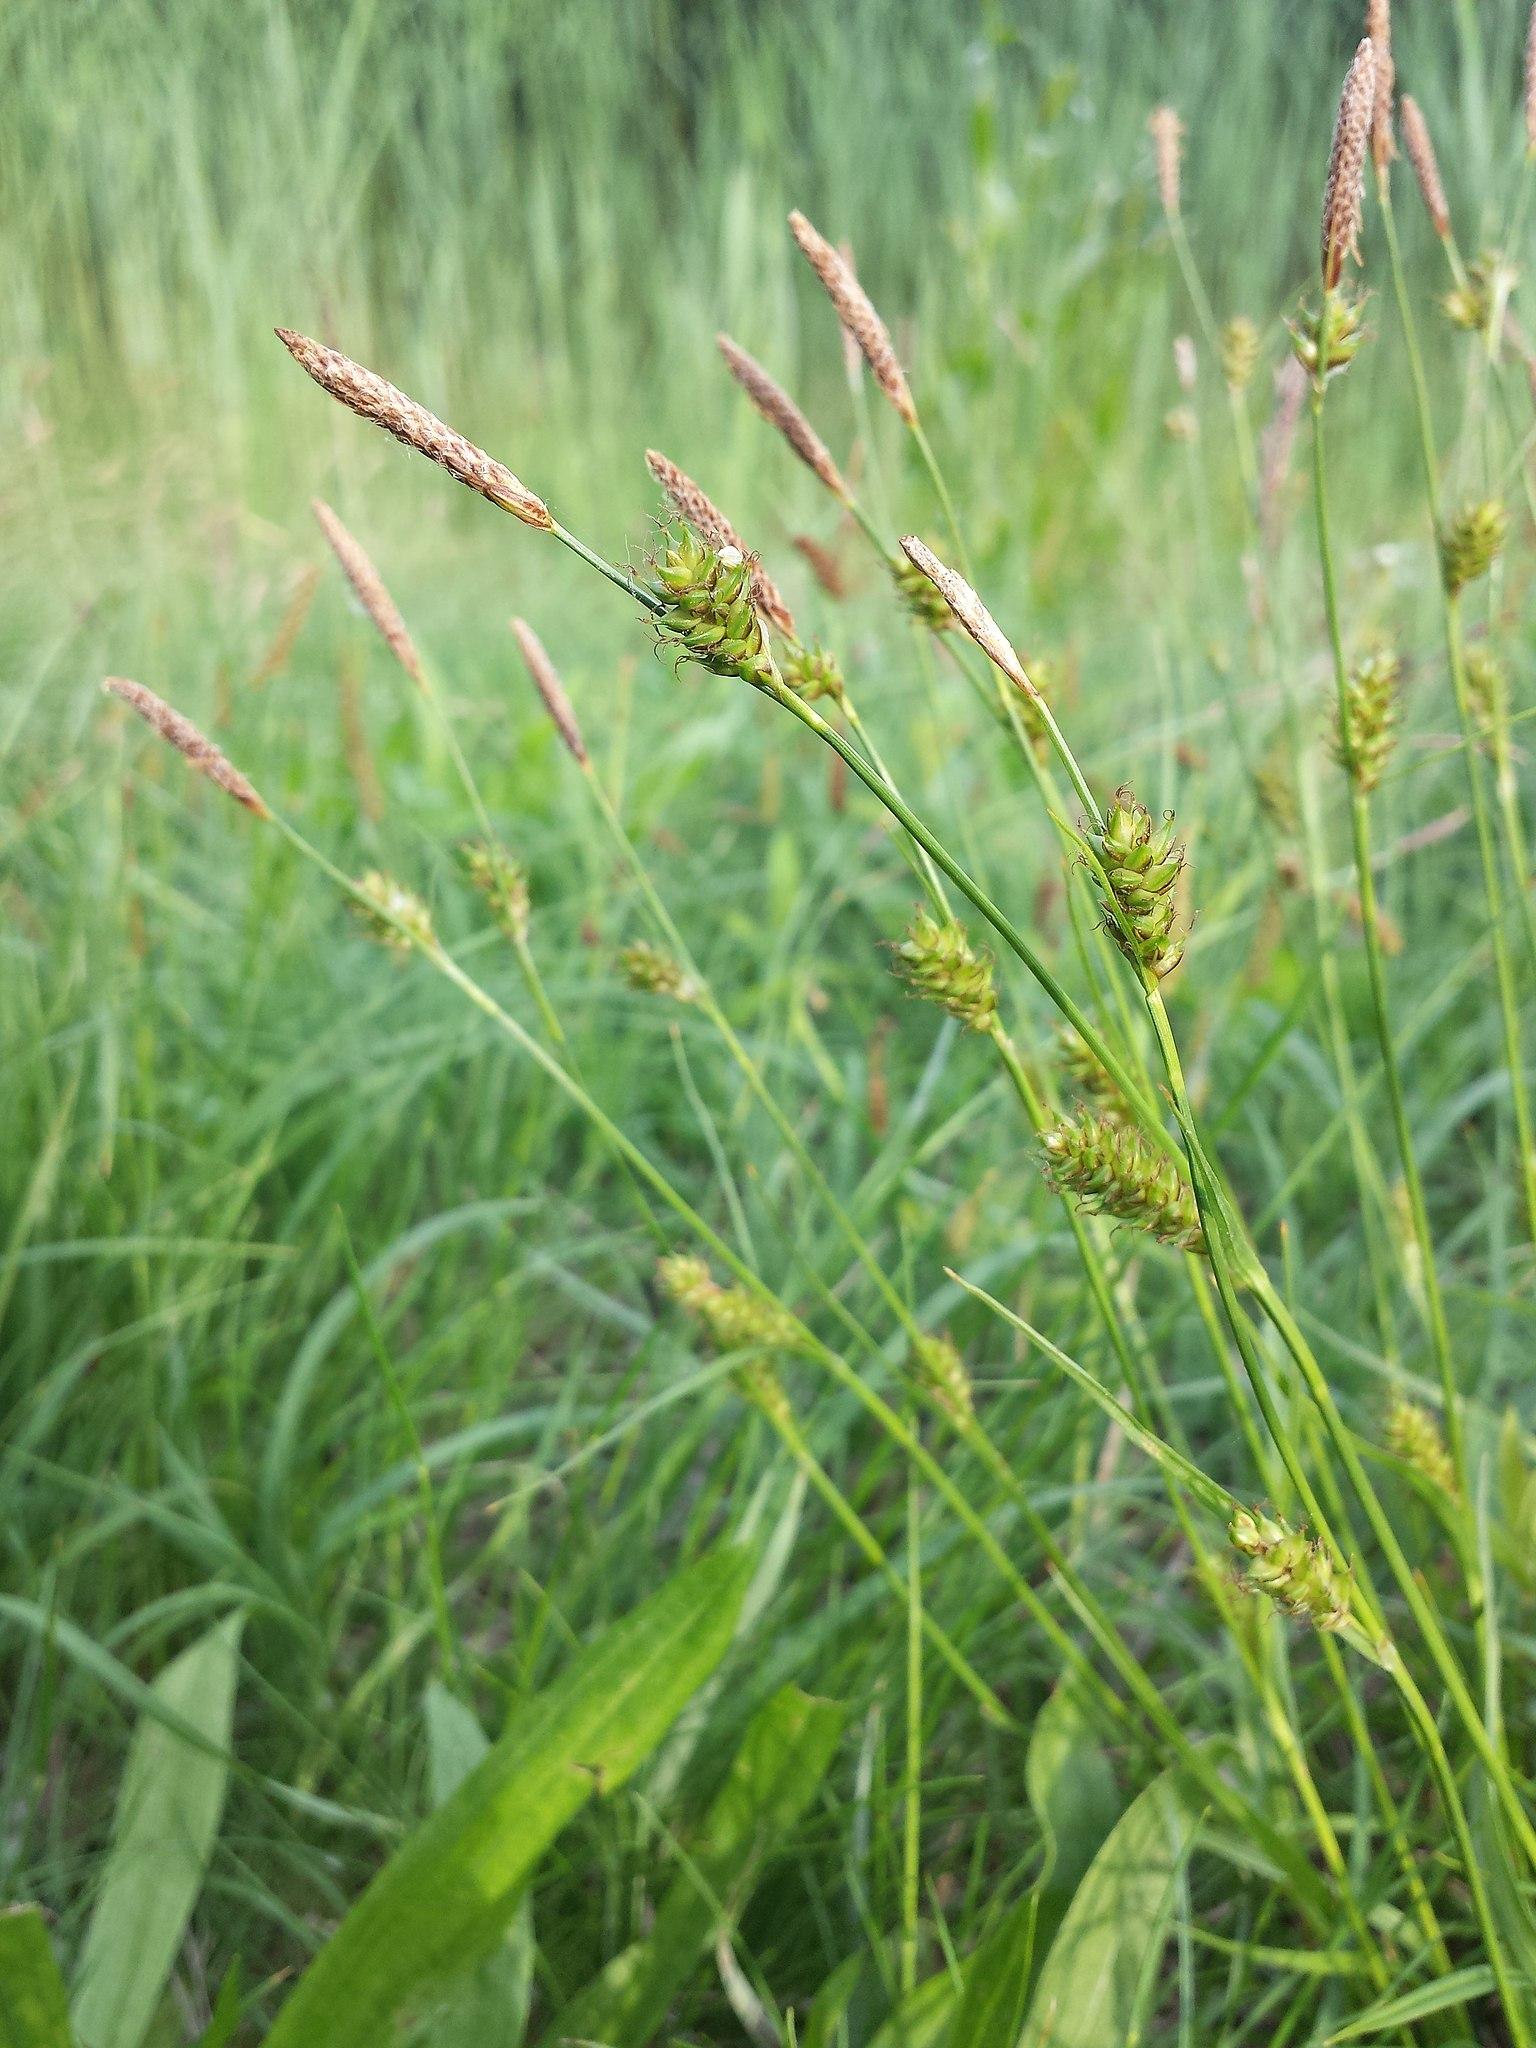 white-brown seedheads with lime spikelets, green foliage and stems